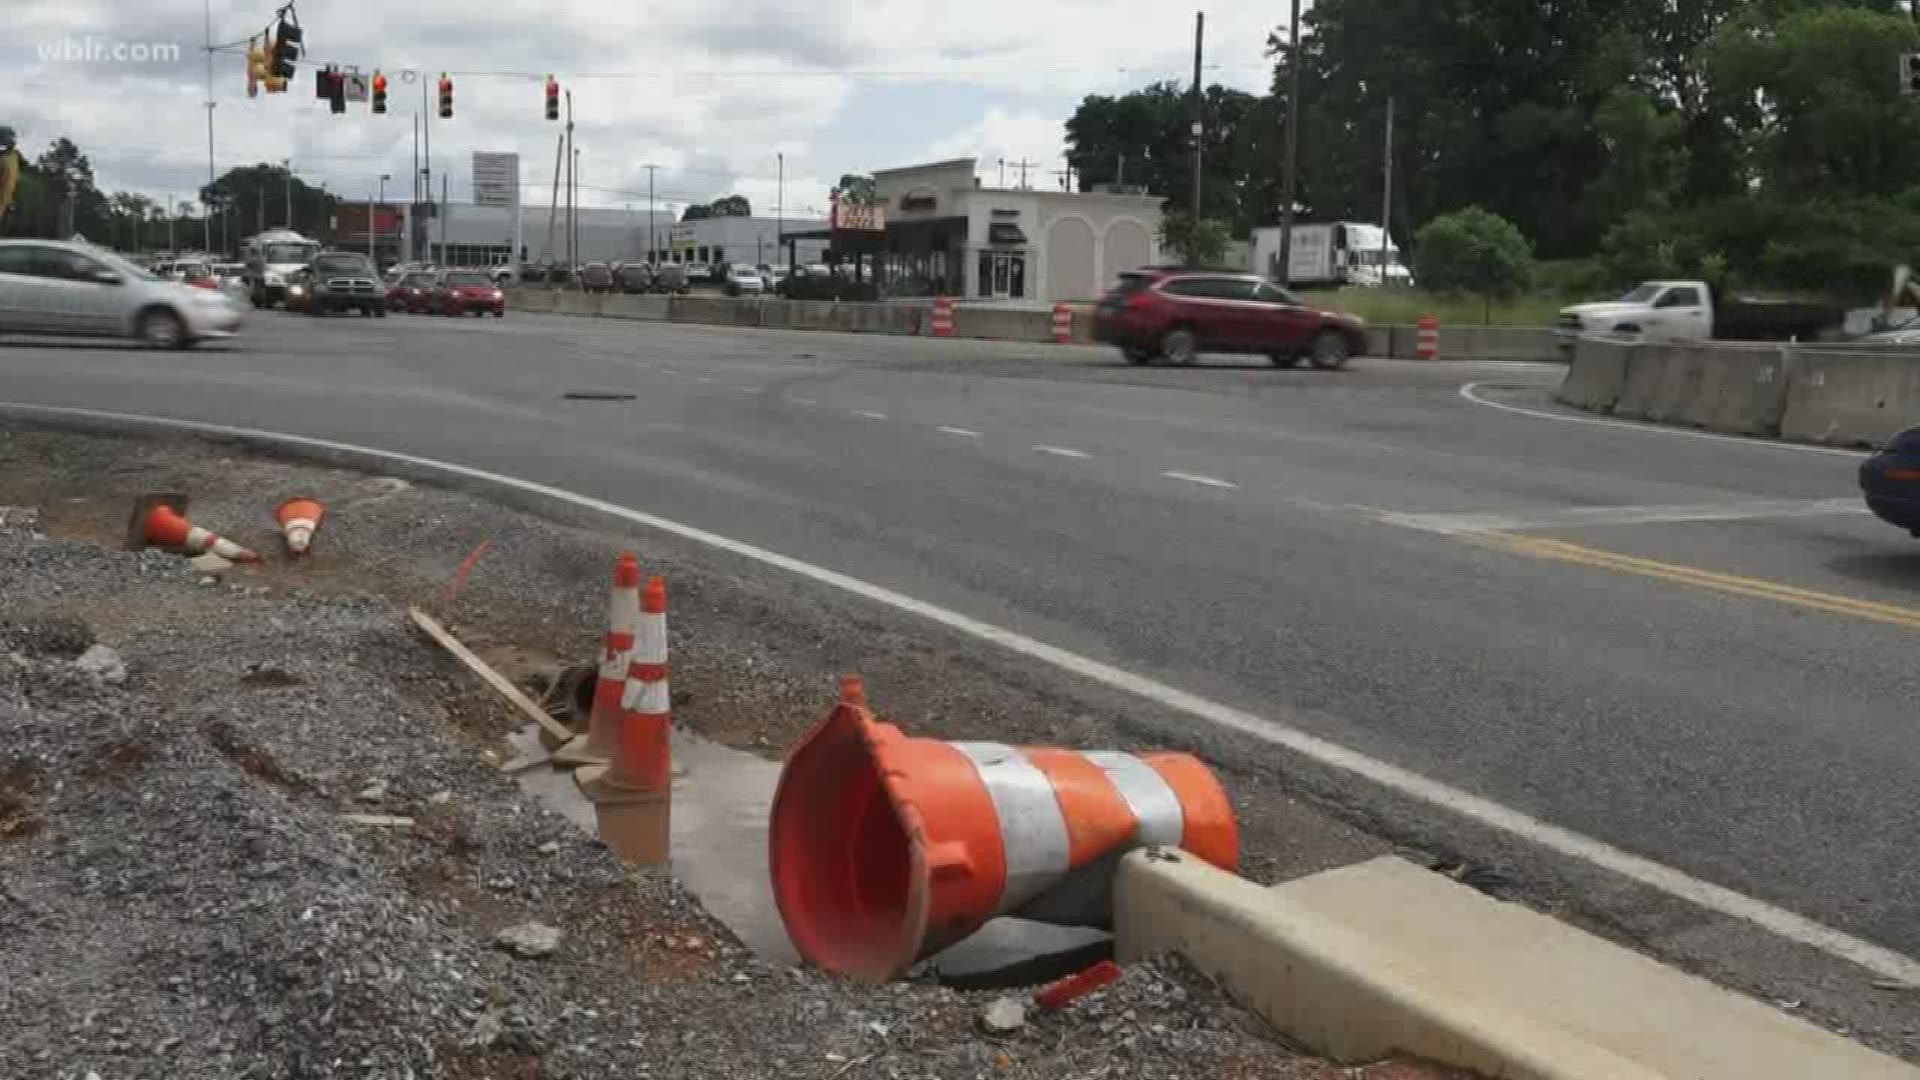 On this Driving You Crazy Monday- a construction project in Lenoir City still has a long way to go after multiple delays have pushed its completion date back again.